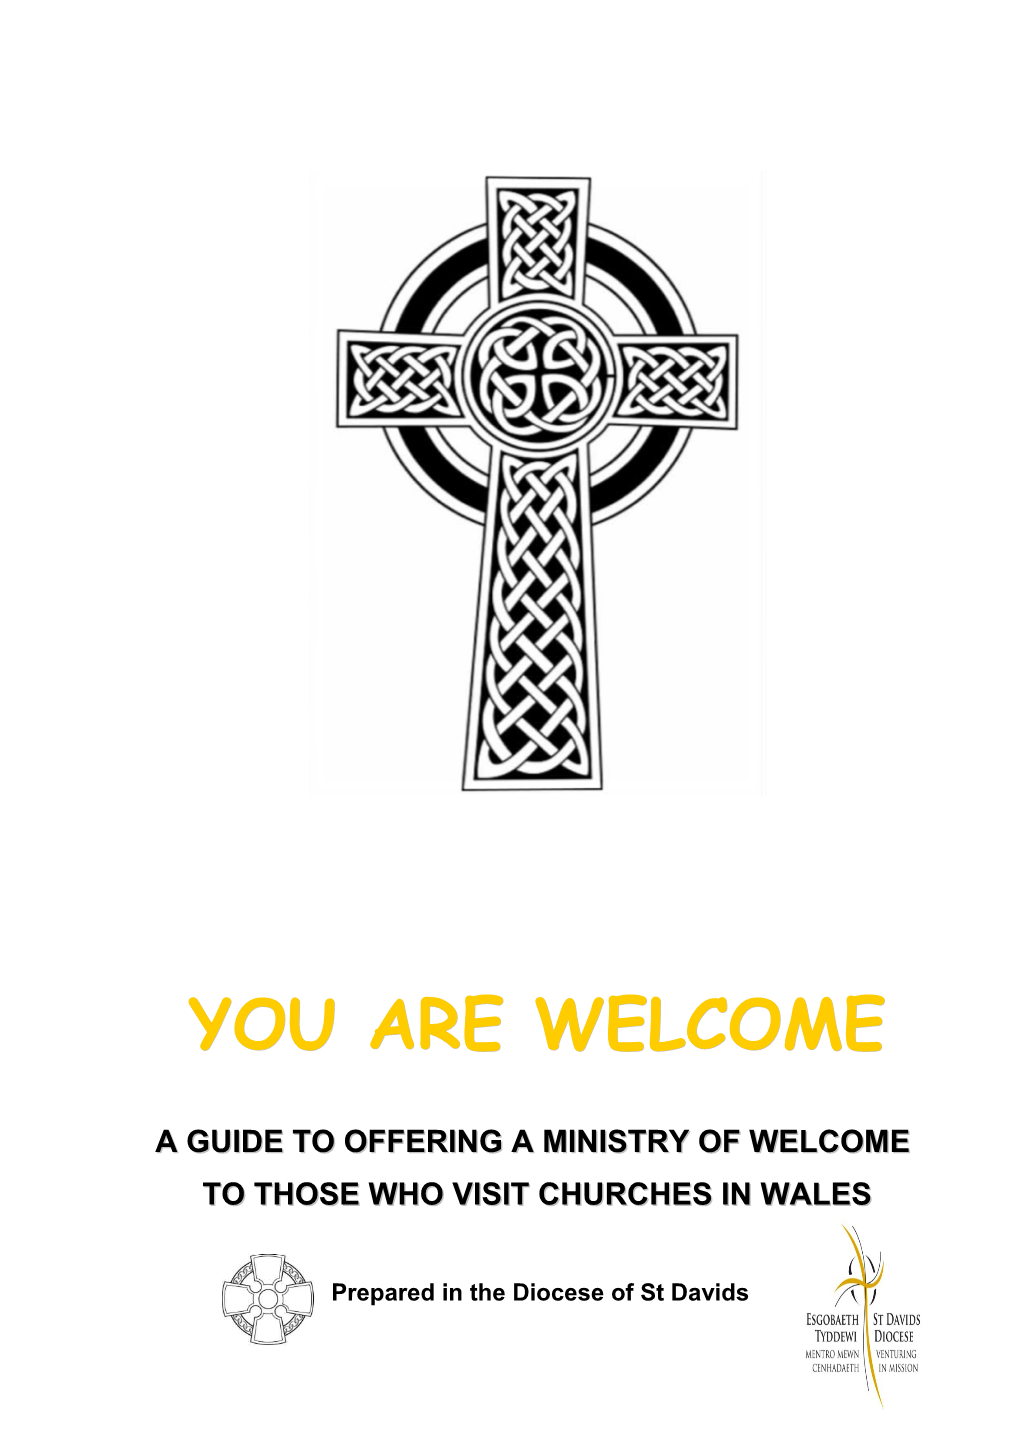 A Guide to Offering a Ministry of Welcome